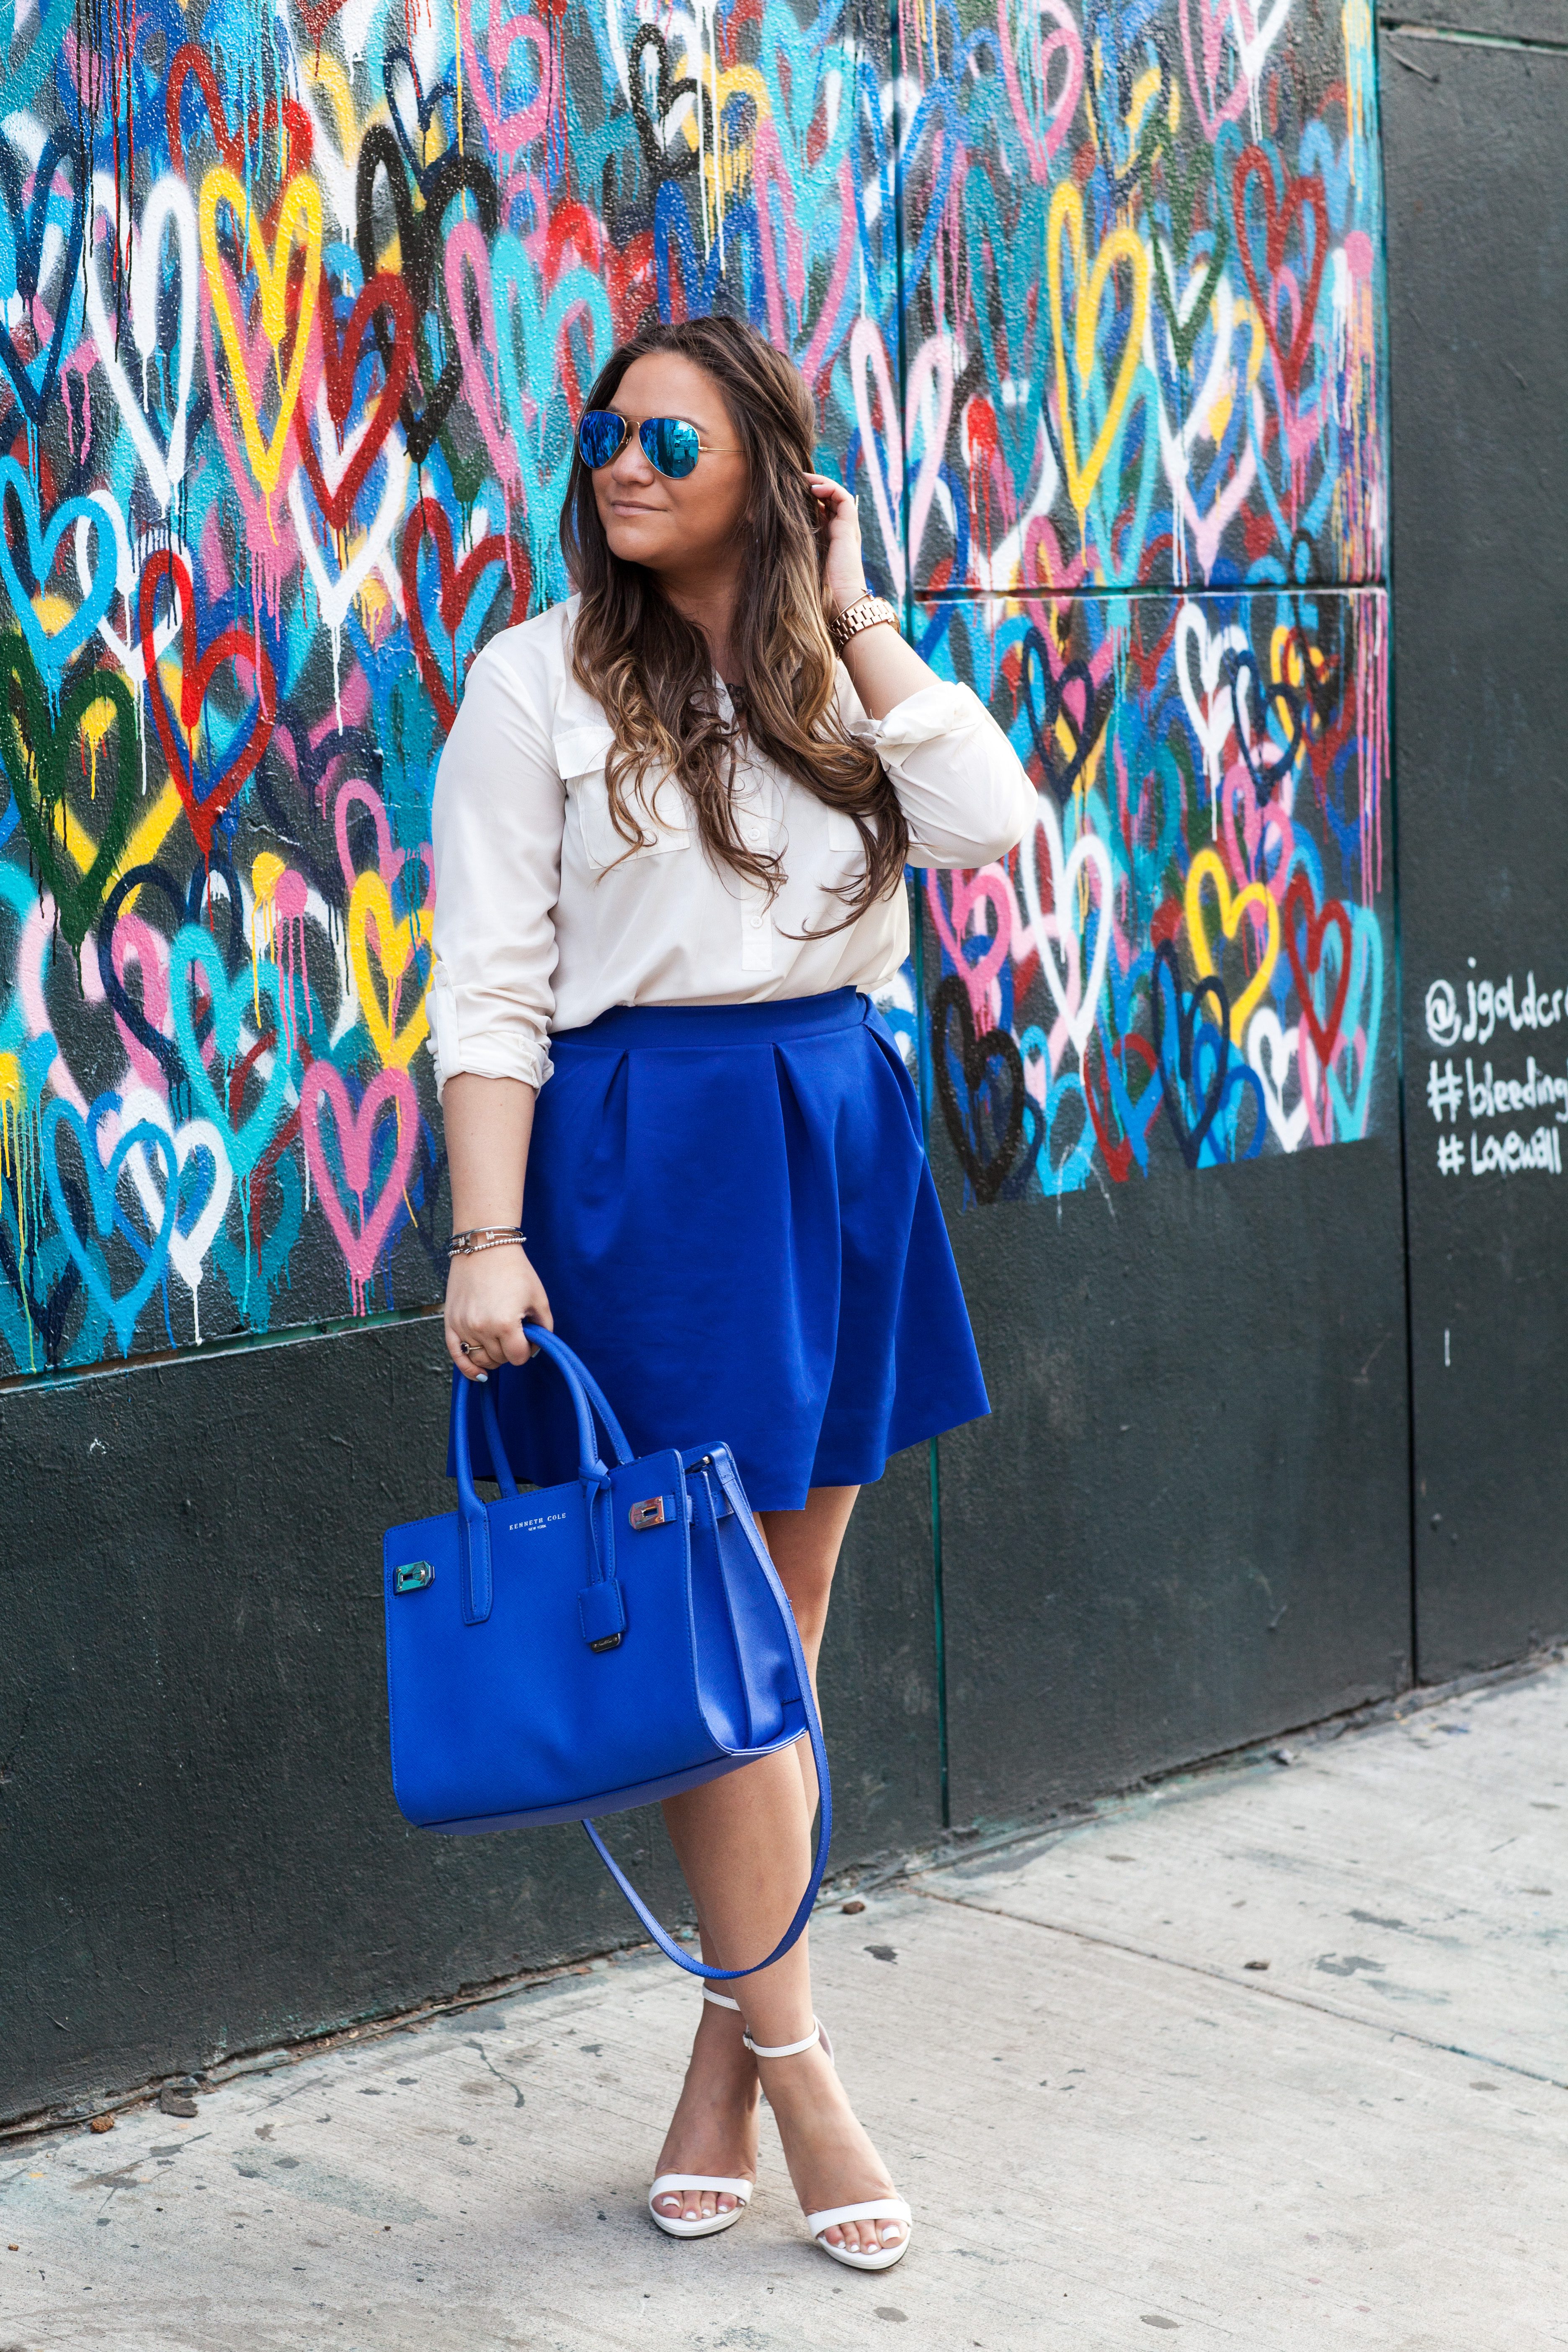 melissatierney, missyonmadison, nyc, heartwall, lovewall, graffitiart, graffiti, blueskirt, whitebuttondown, bluesatchel, mirroredaviators, whiteanklestrapsandals, raybans, springstyle, spring, streetstyle, ootd, outfitinspo, springcolors, what to wear to work in the spring,